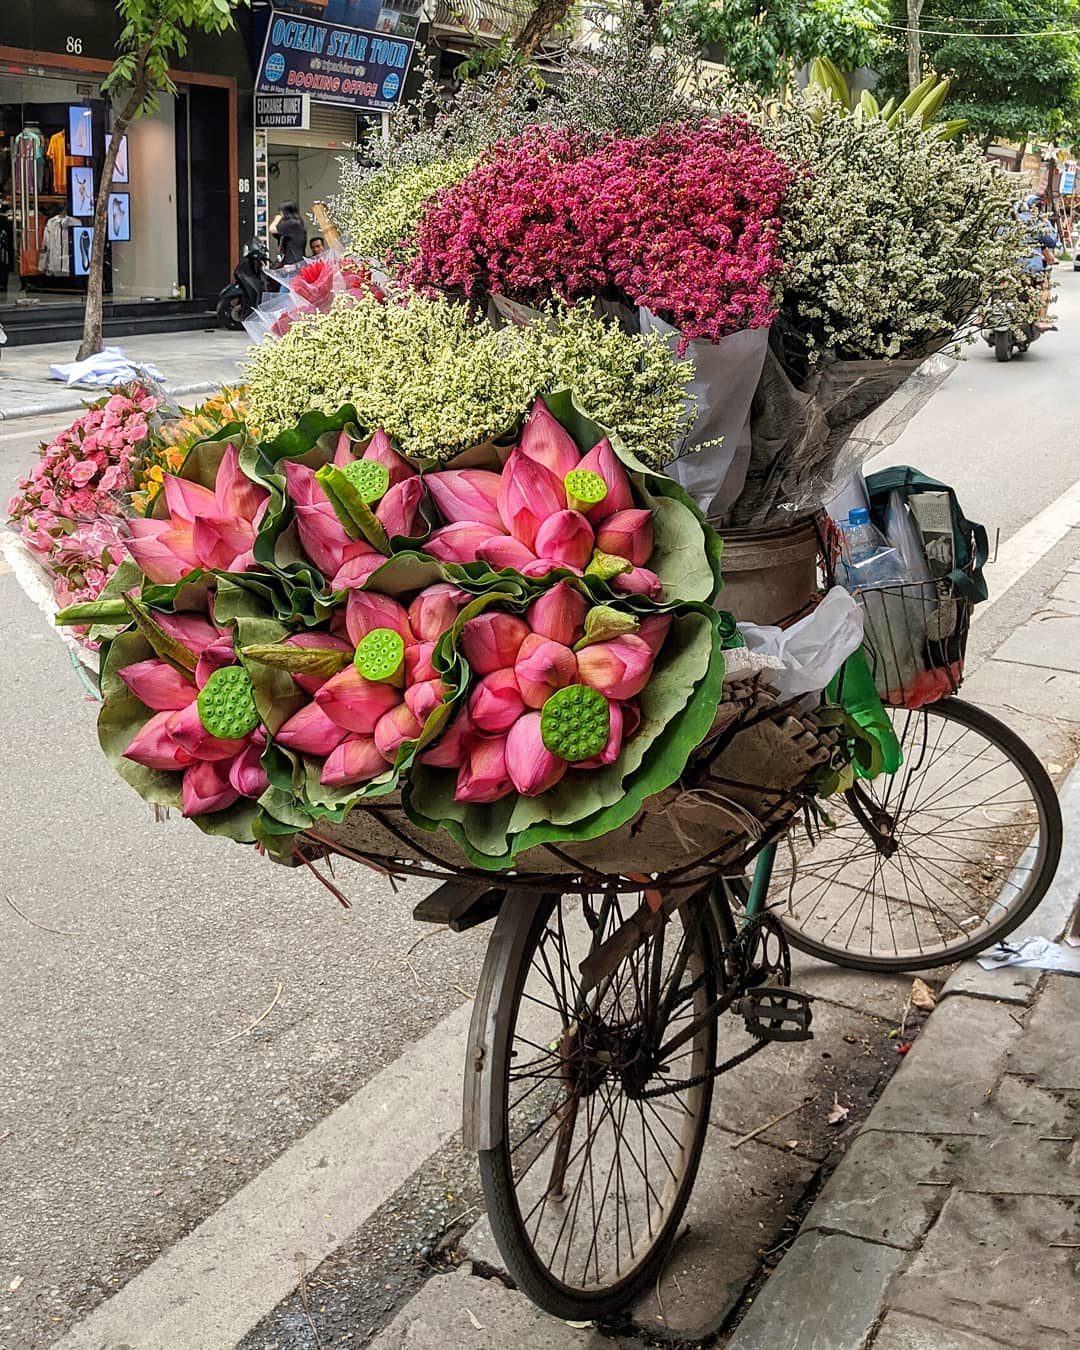 A photo show a street vendor selling flowers on a bicycle capture in Hanoi by Katie Lockhart